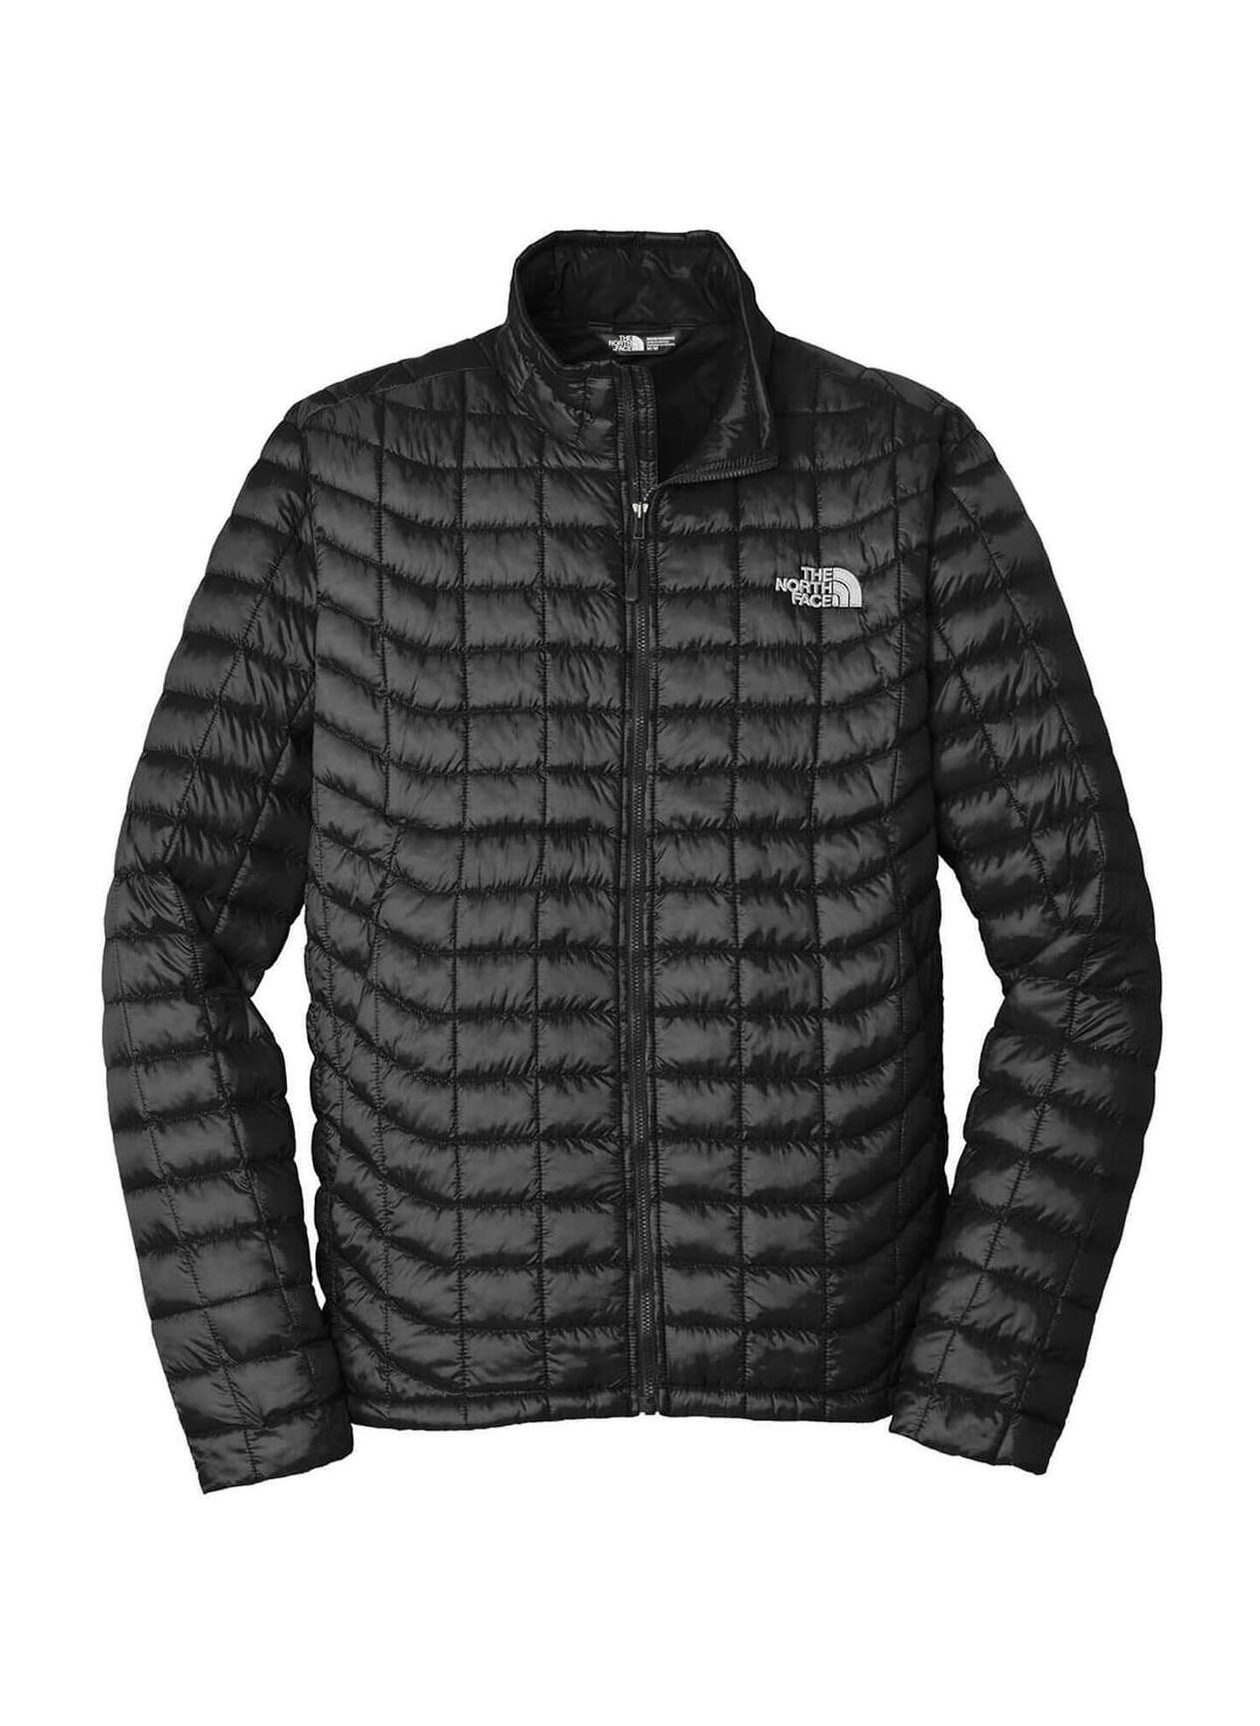 The North Face Men's Black ThermoBall Trekker Jacket